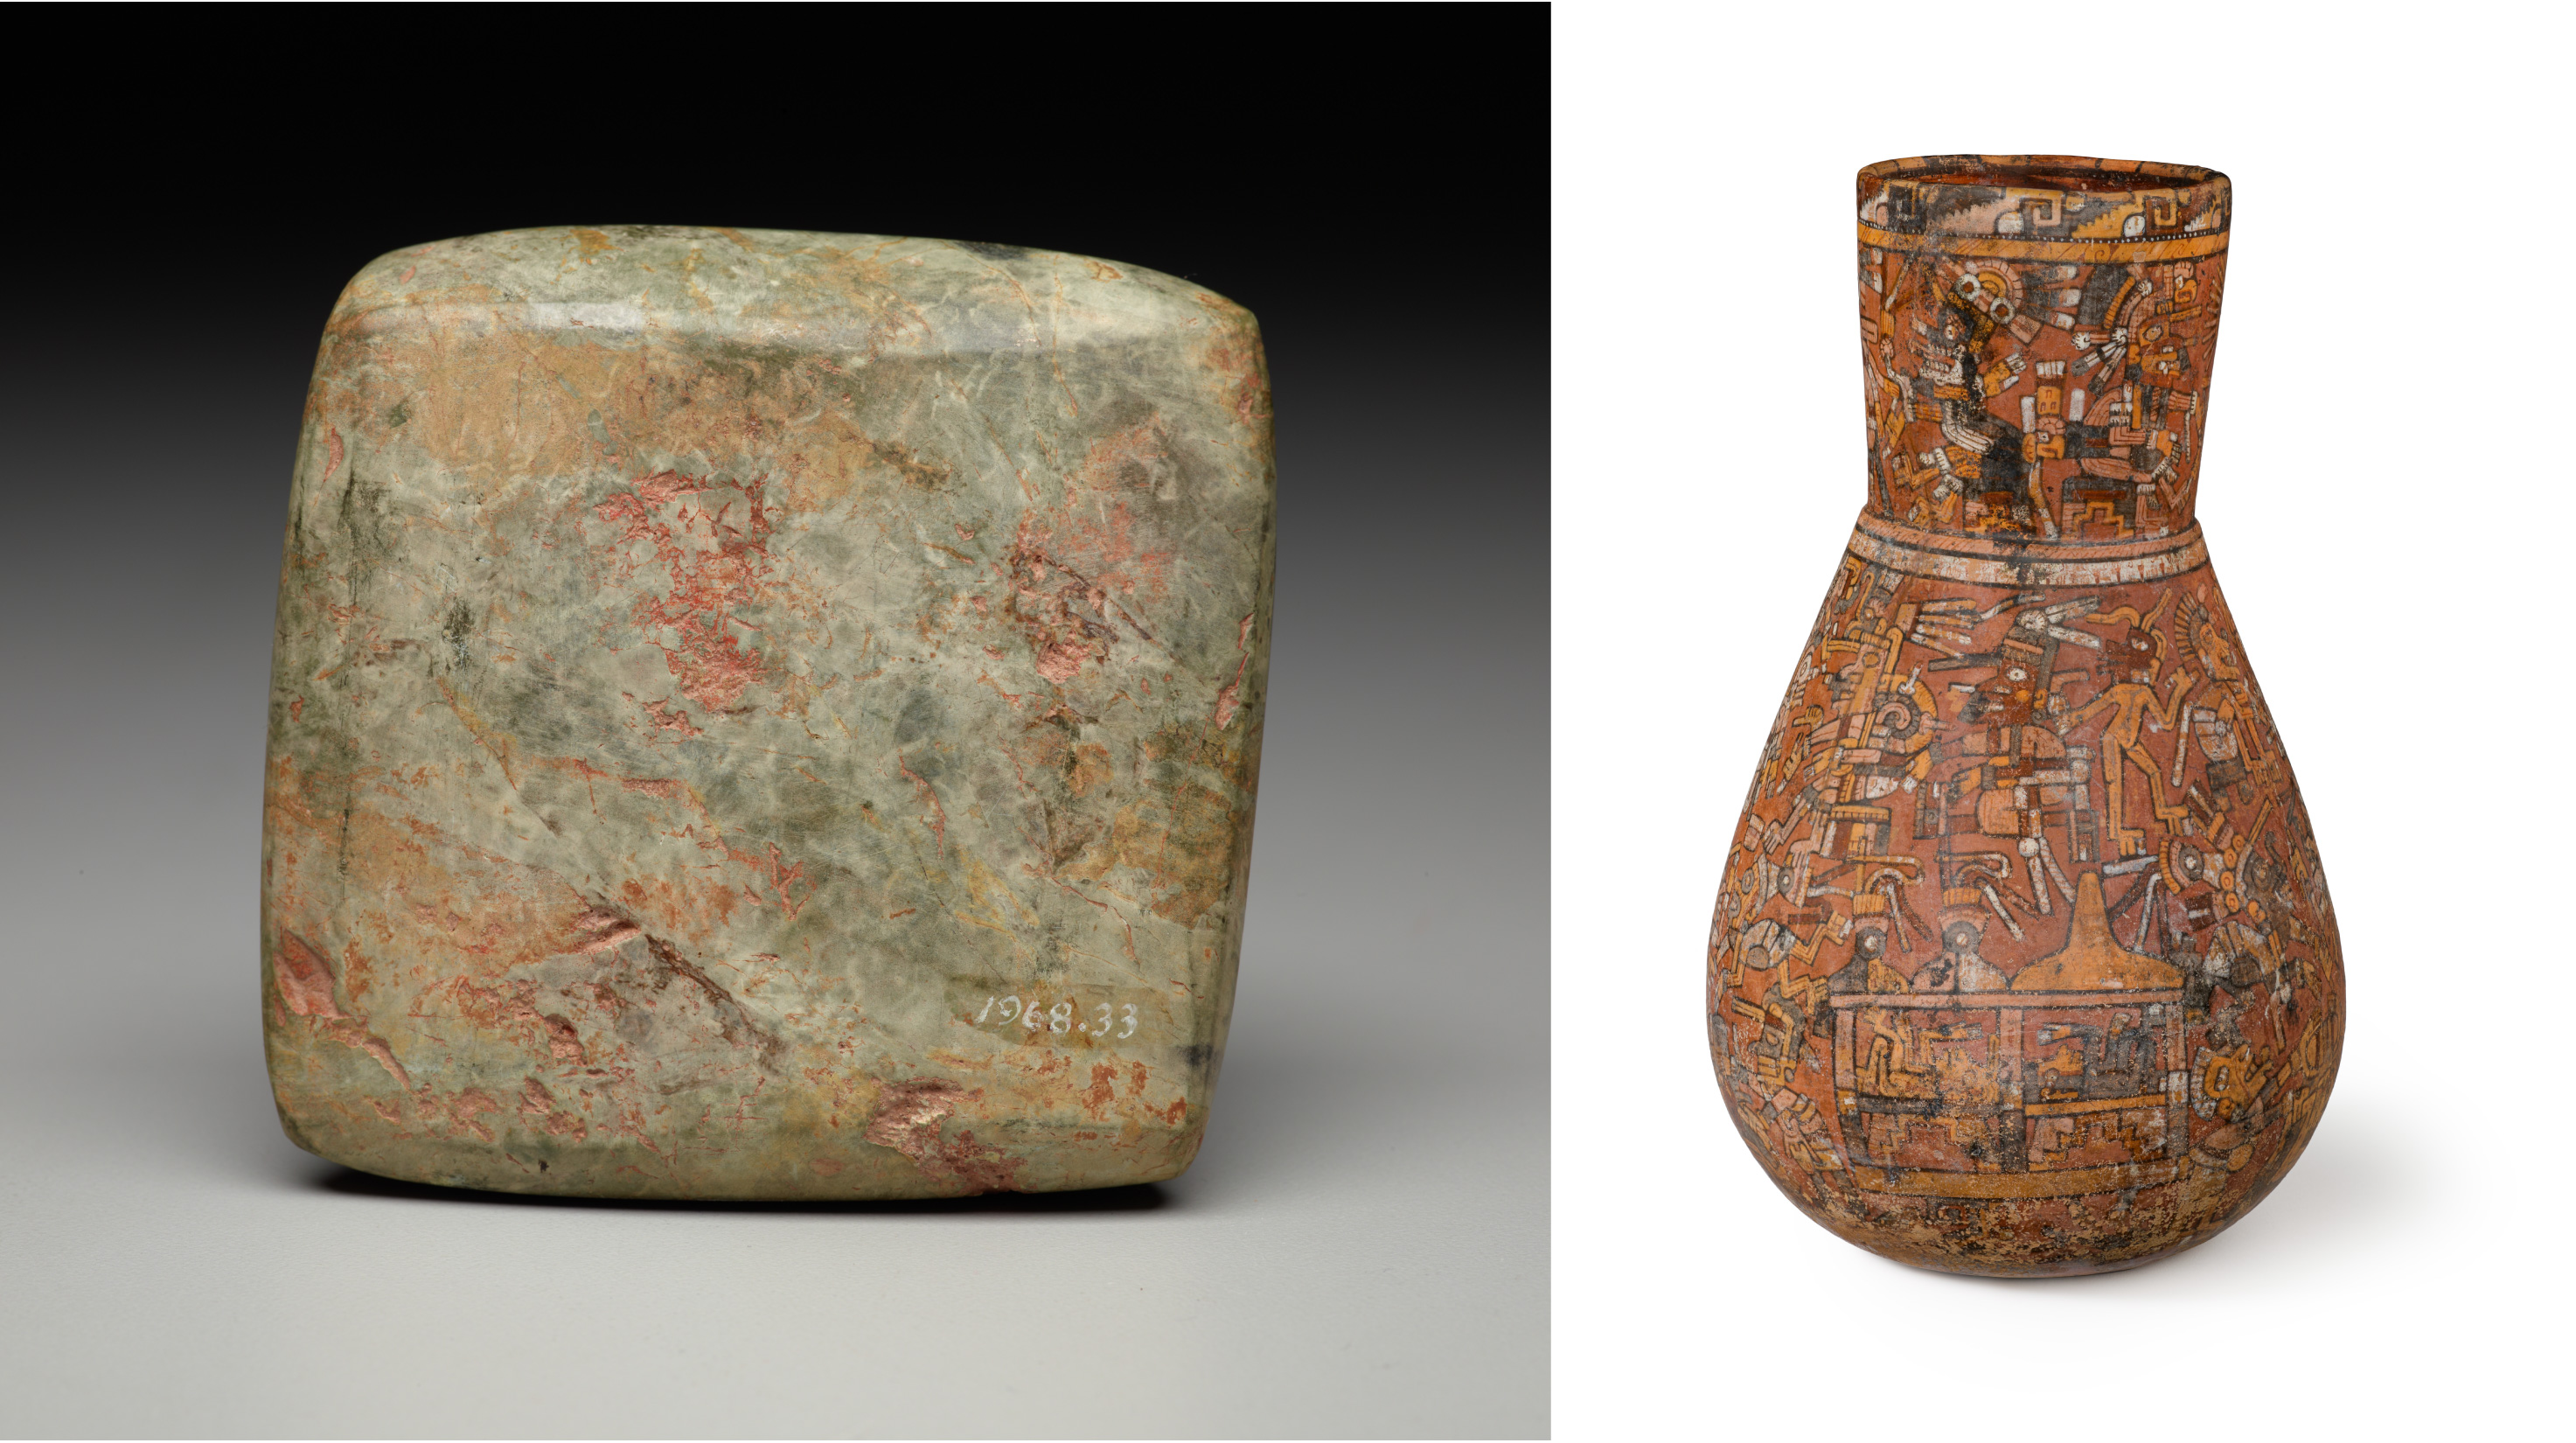 Tablet with Incised Symbols, 900–500 BCE, Vessel with Codex-Style Scene, 1350–1500